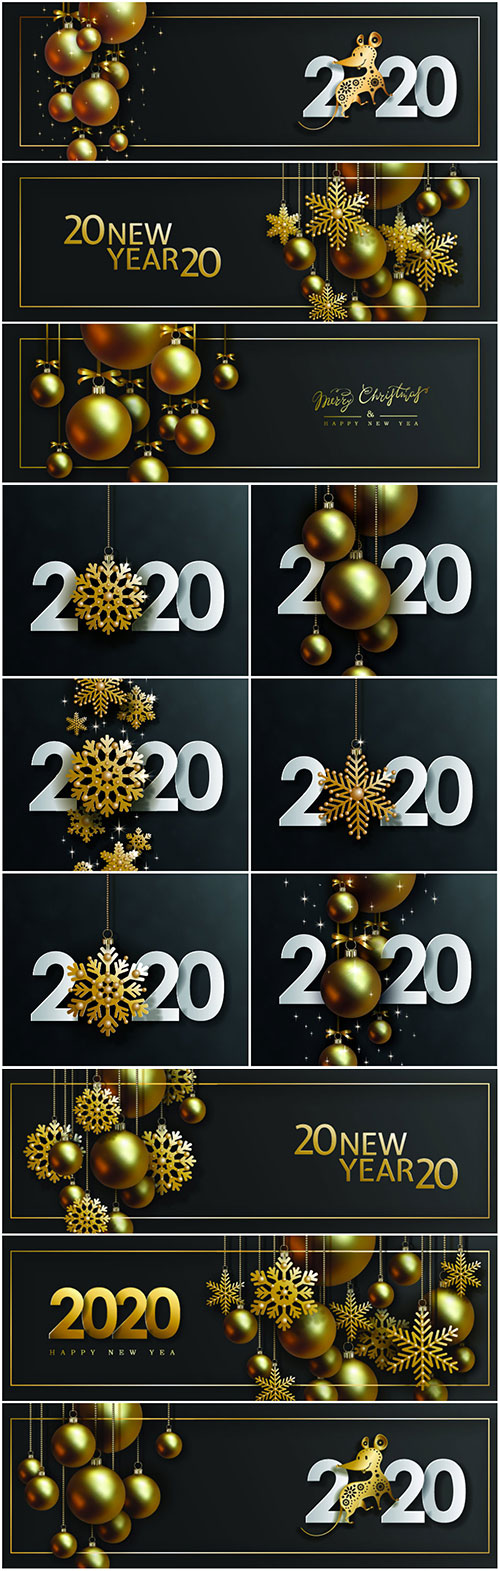 2020 Christmas and New Year design with hanging realistic golden balls and  ...